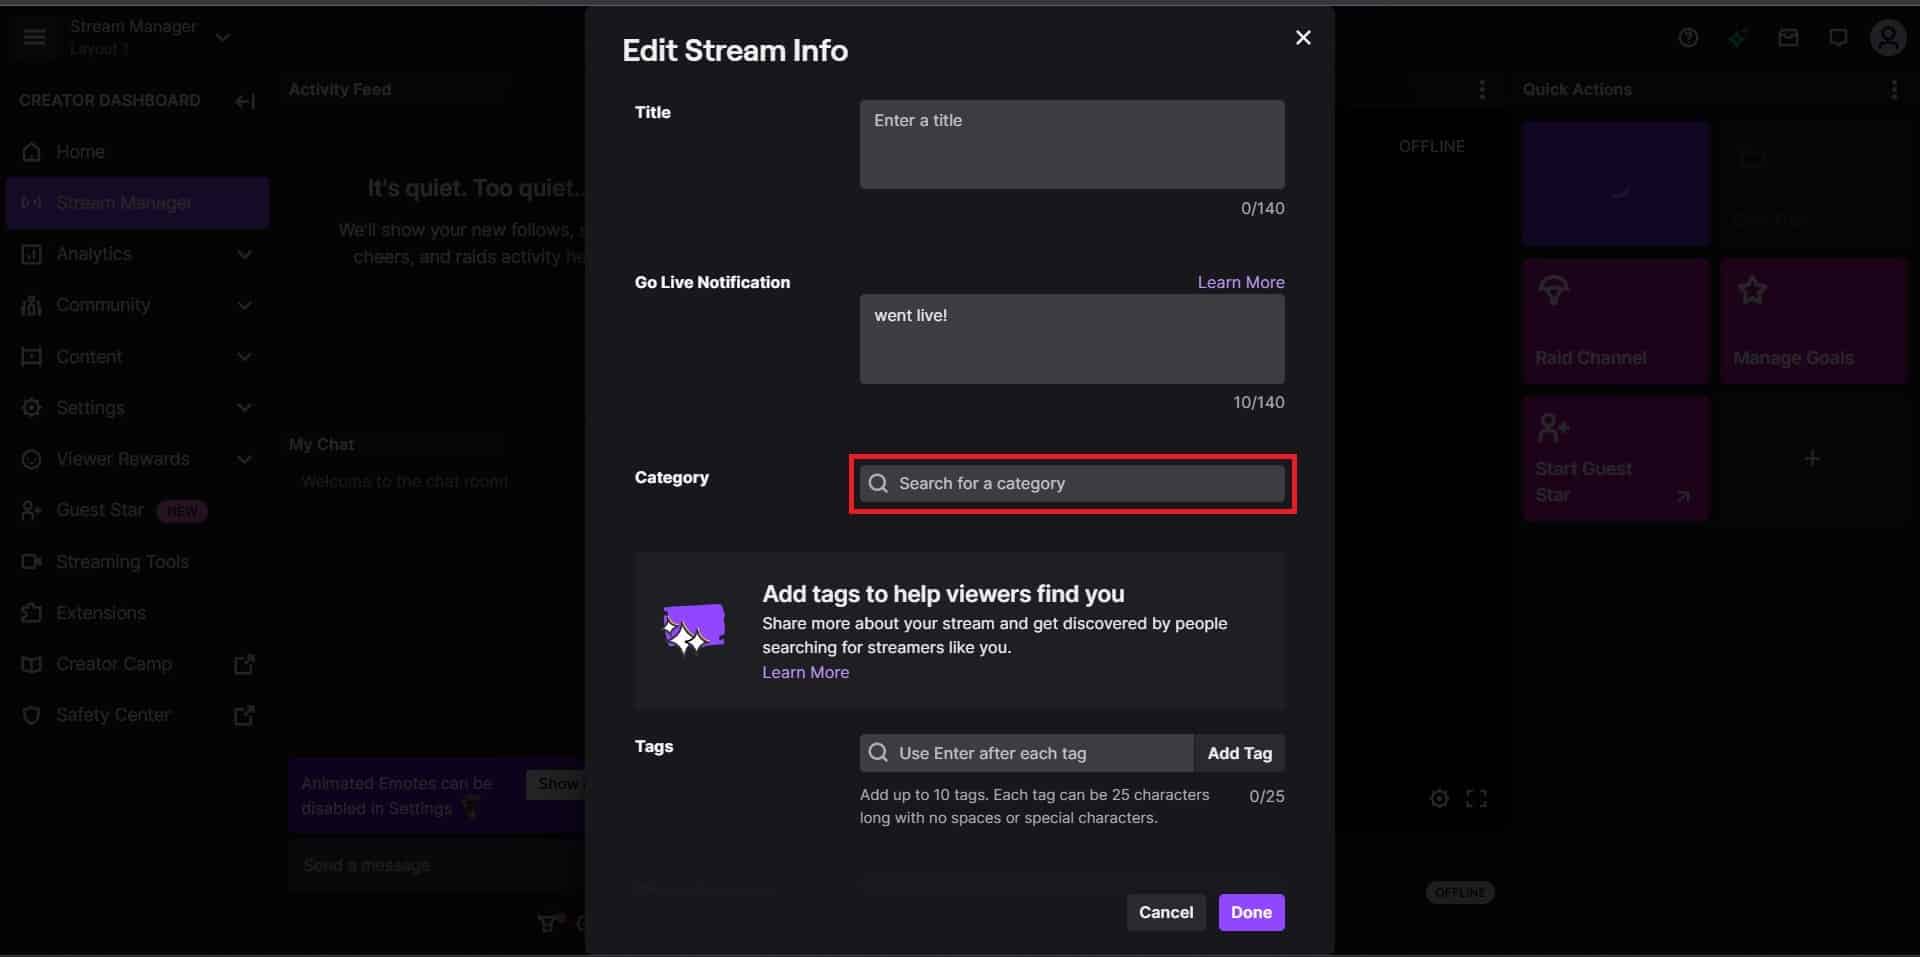 To add a category for what game you're playing on Twitch, search for and select the game or any category in the Category field.